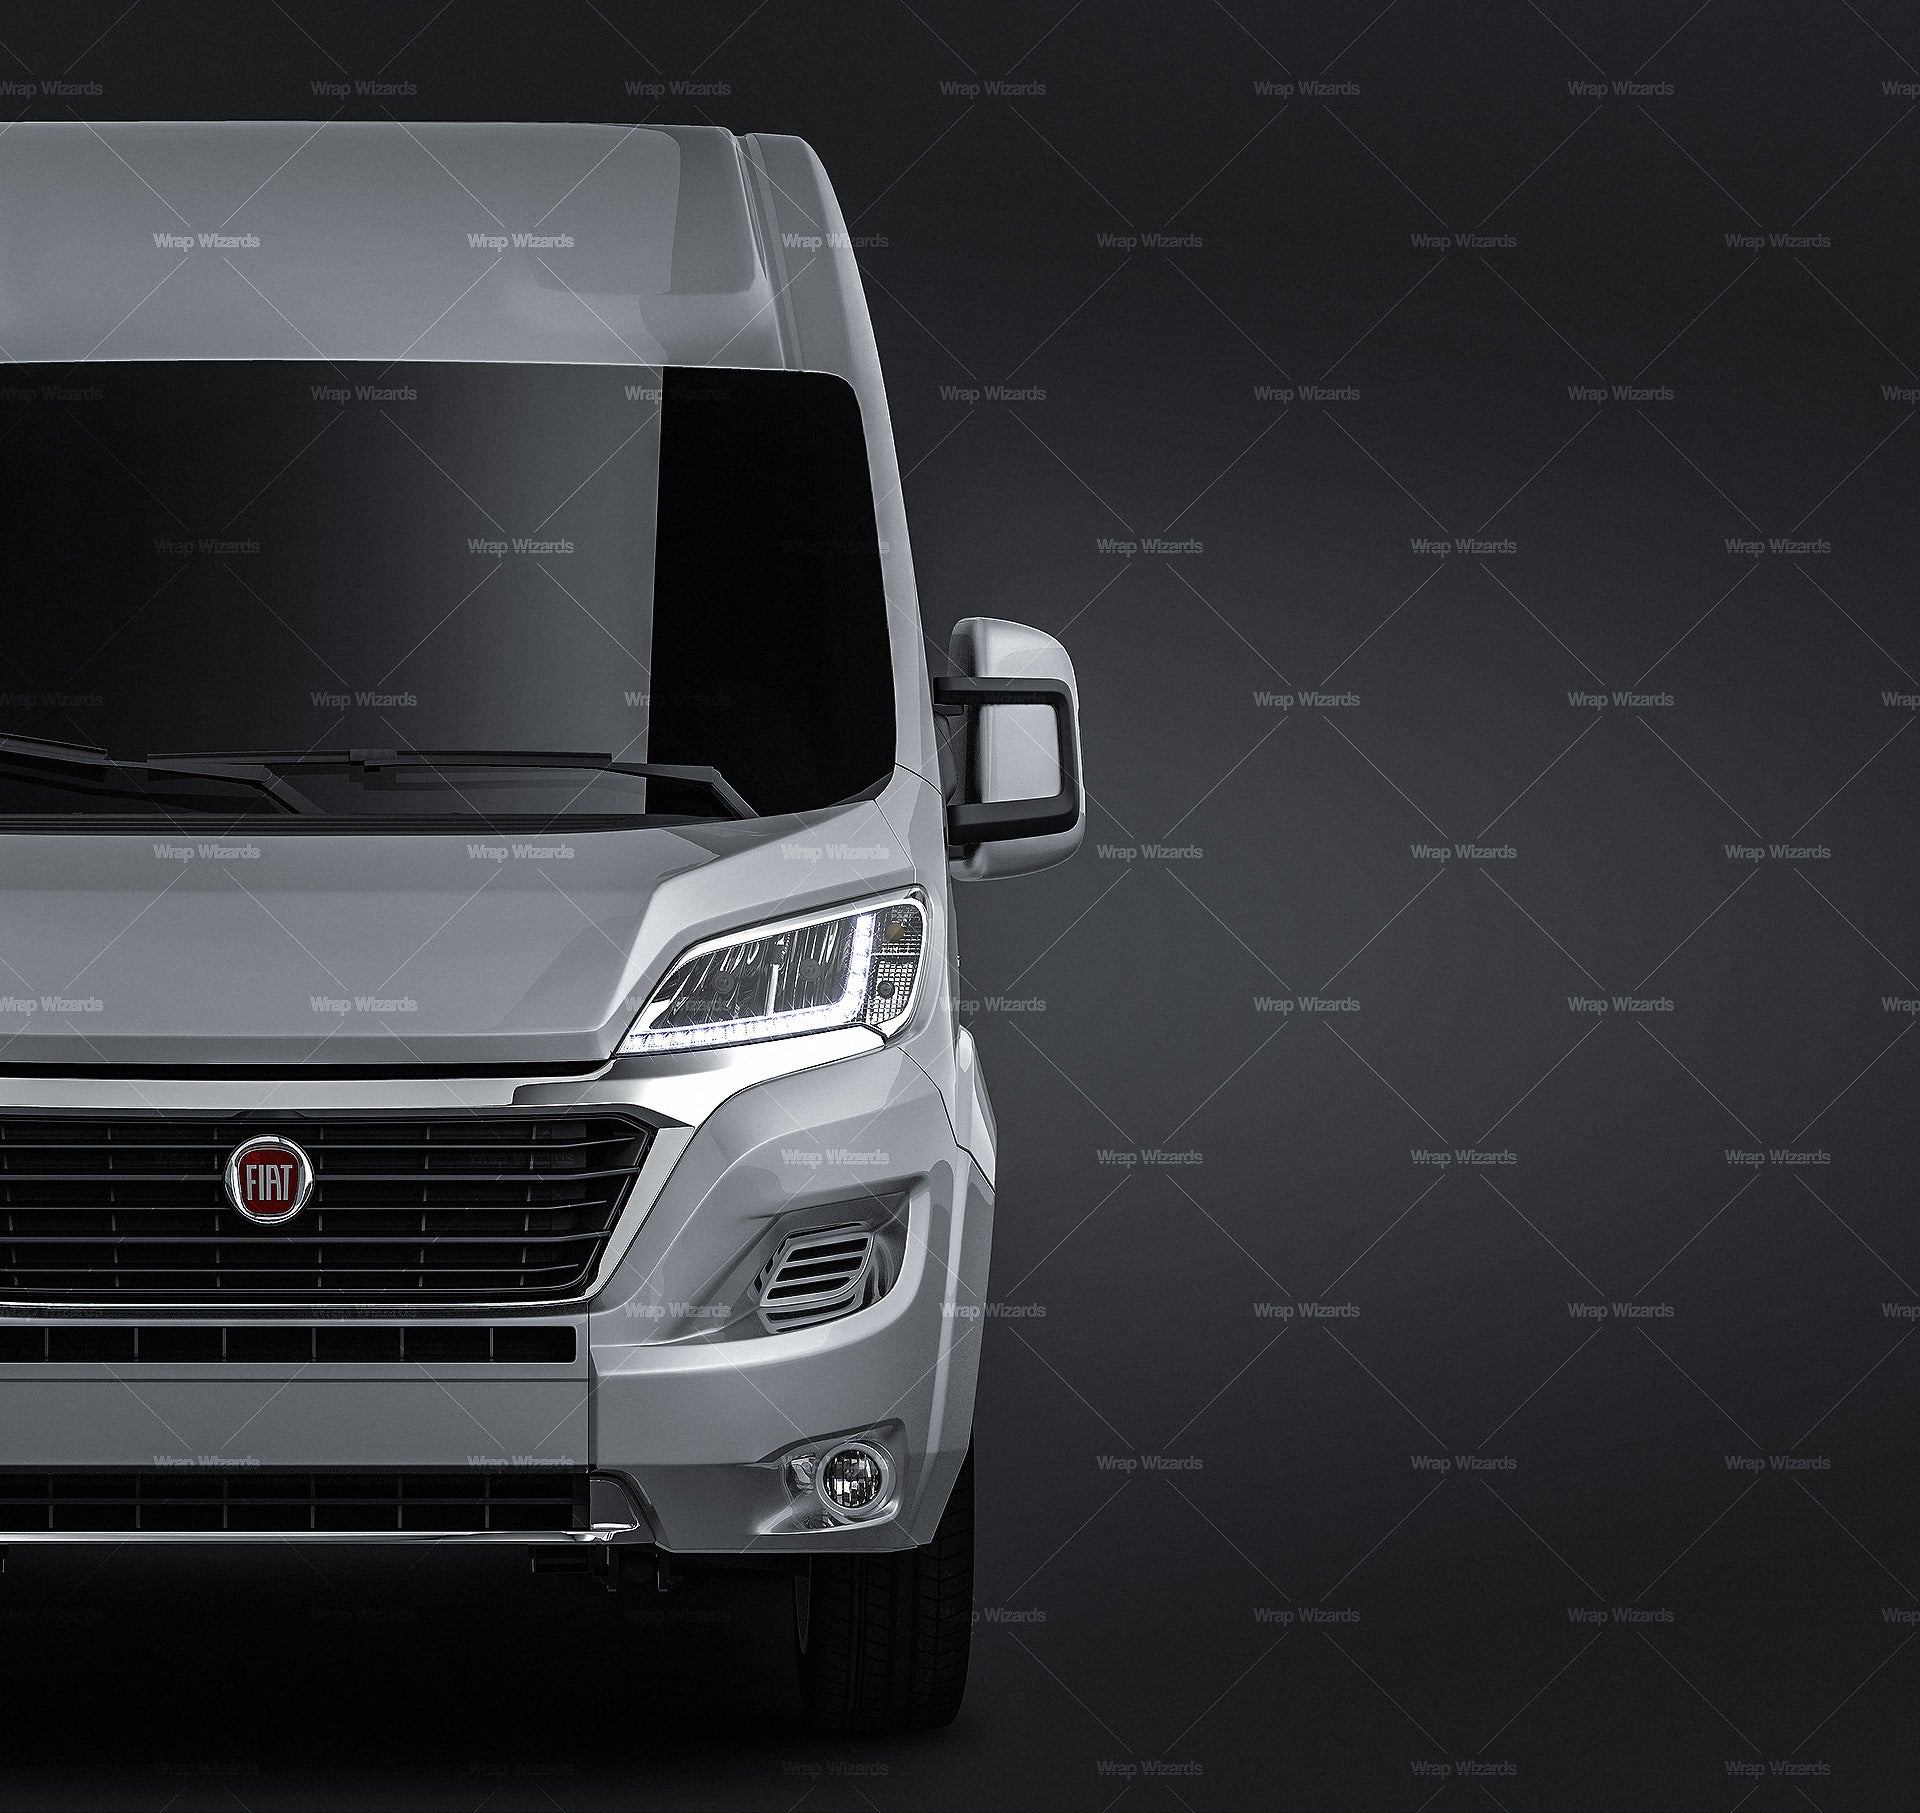 Fiat Ducato 2020 glossy finish - all sides Car Mockup Template.psd